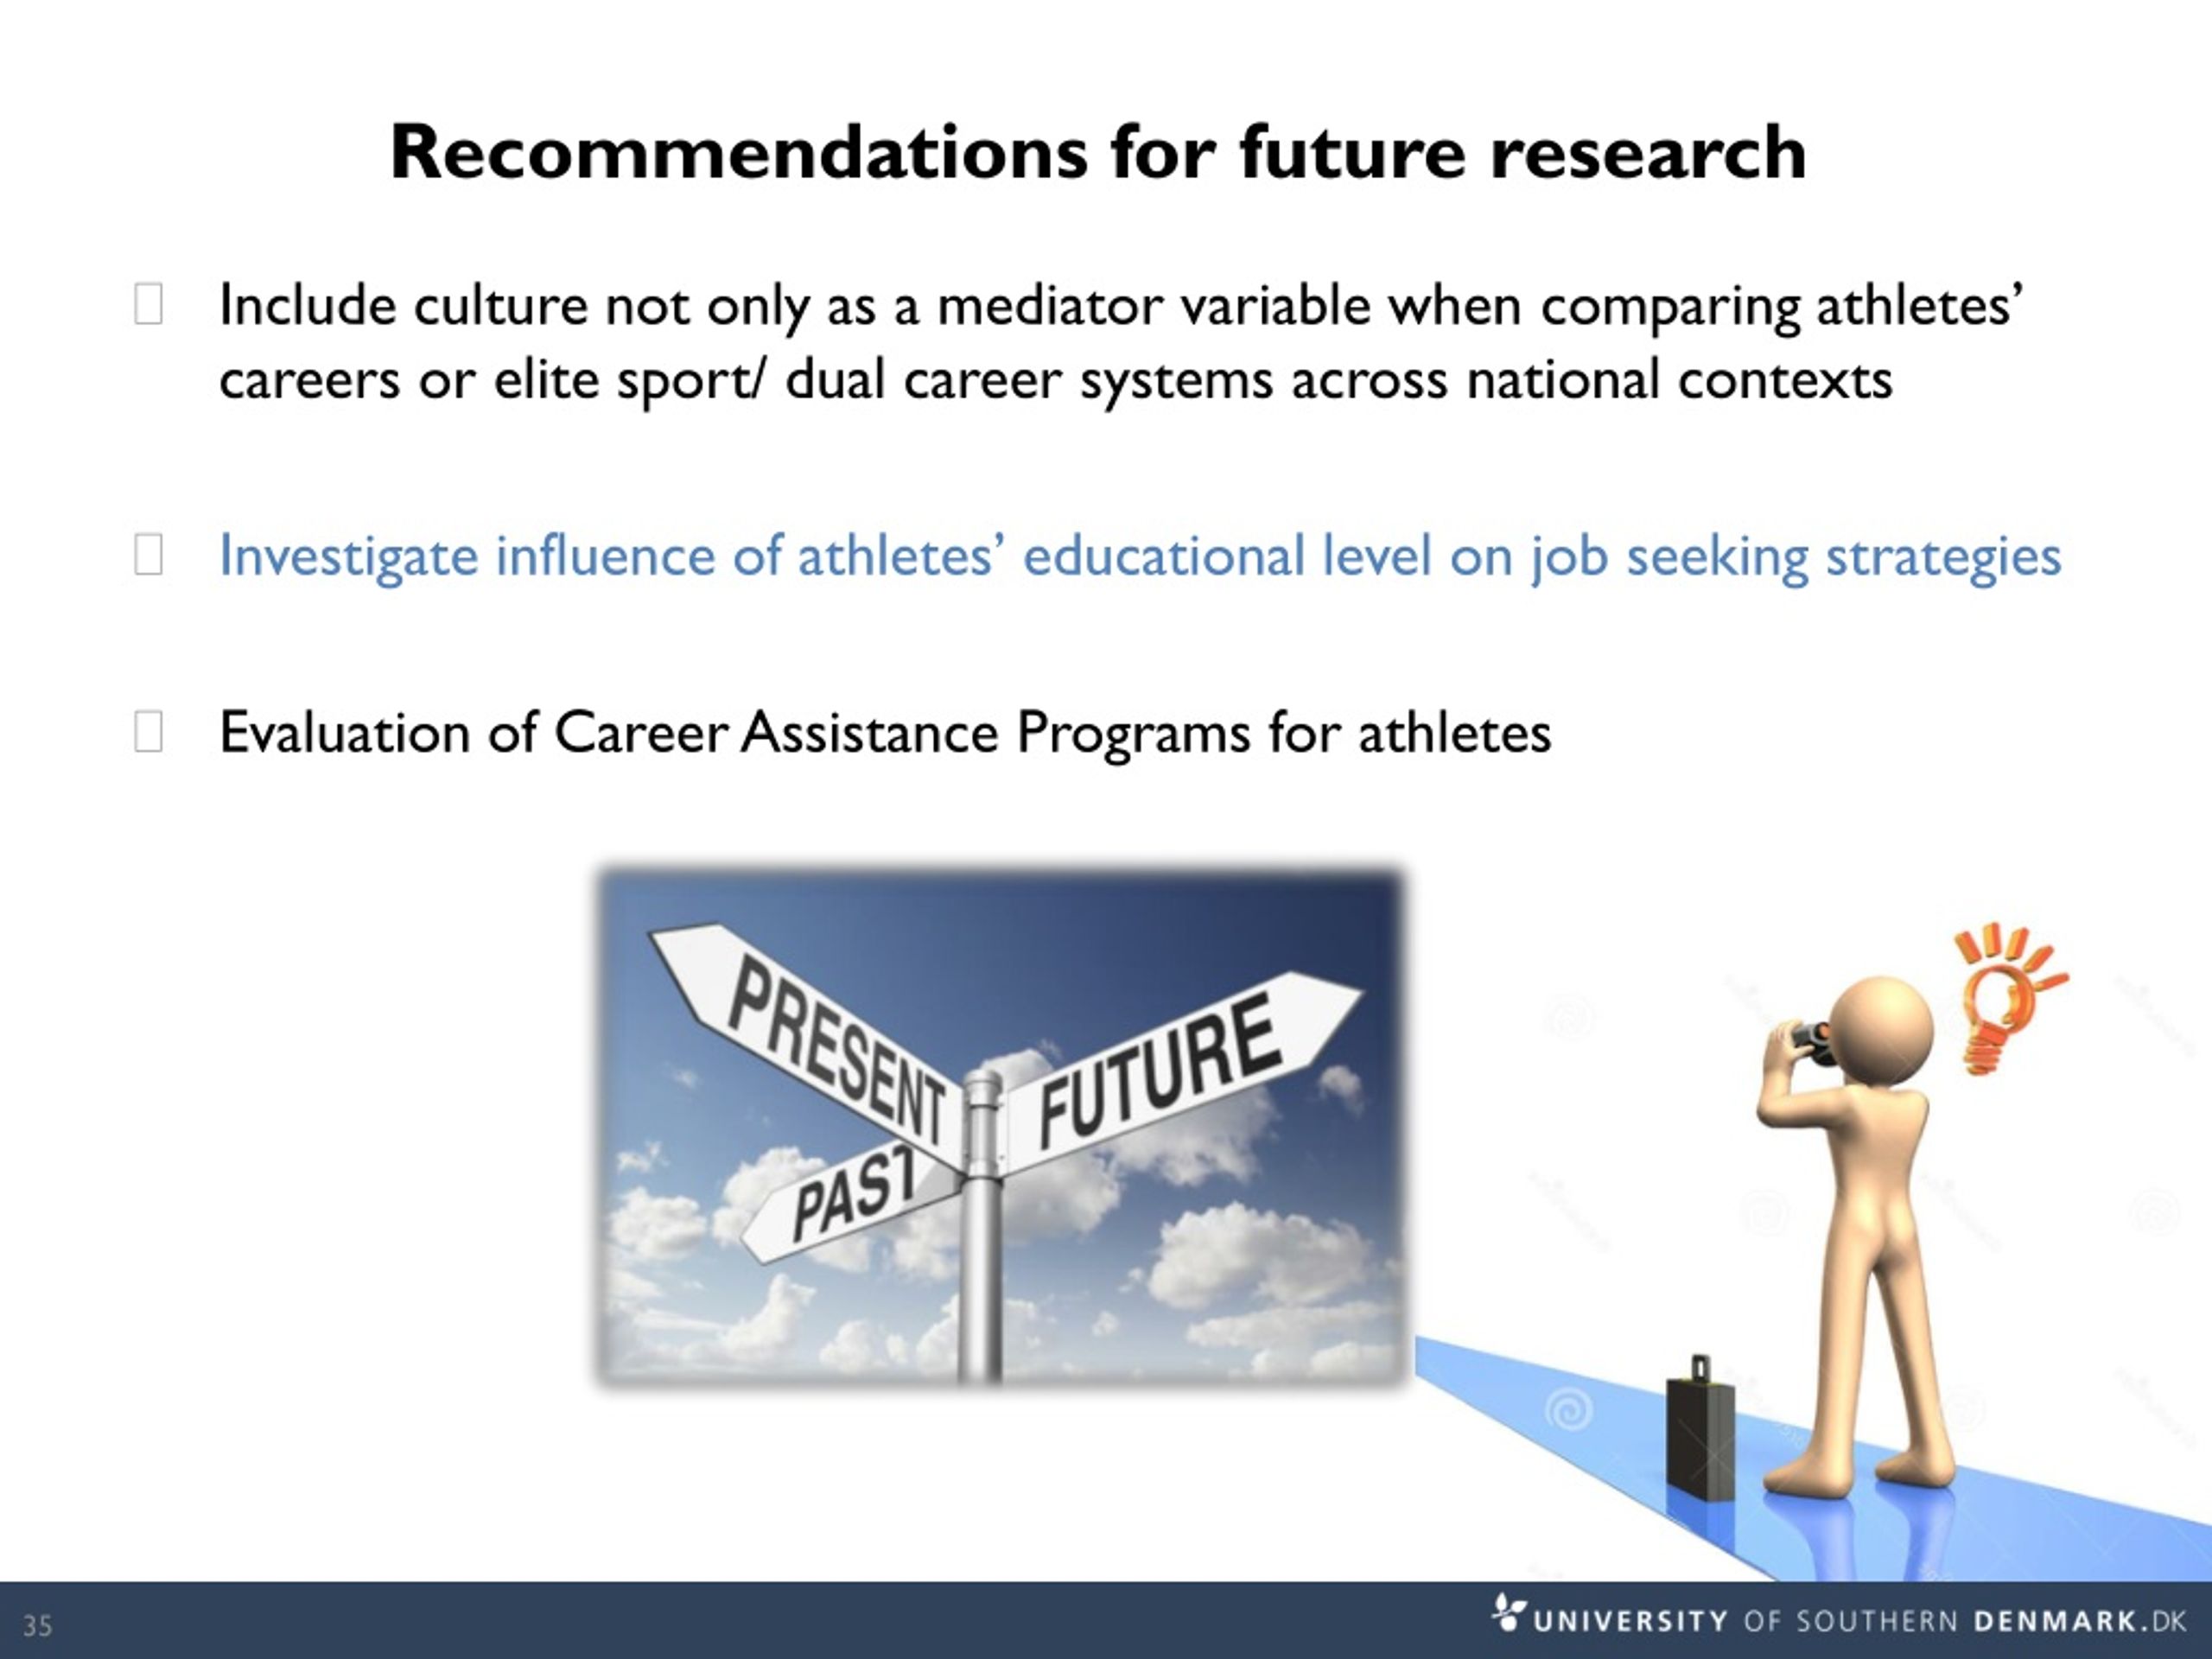 recommendations for future research are included